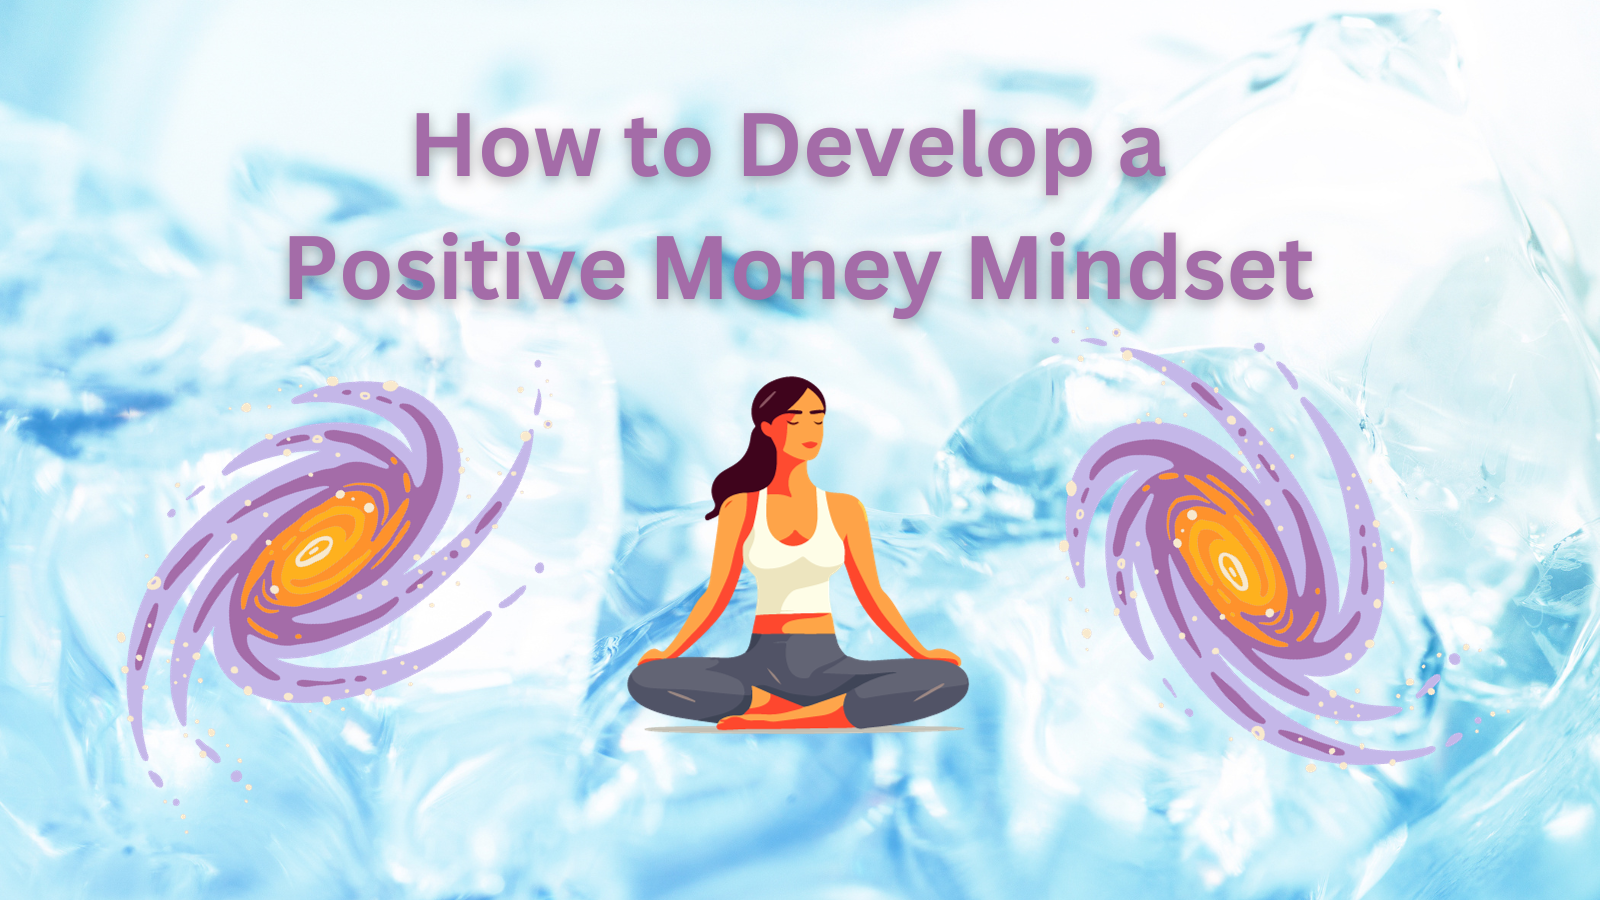 How to Develop a Positive Money Mindset